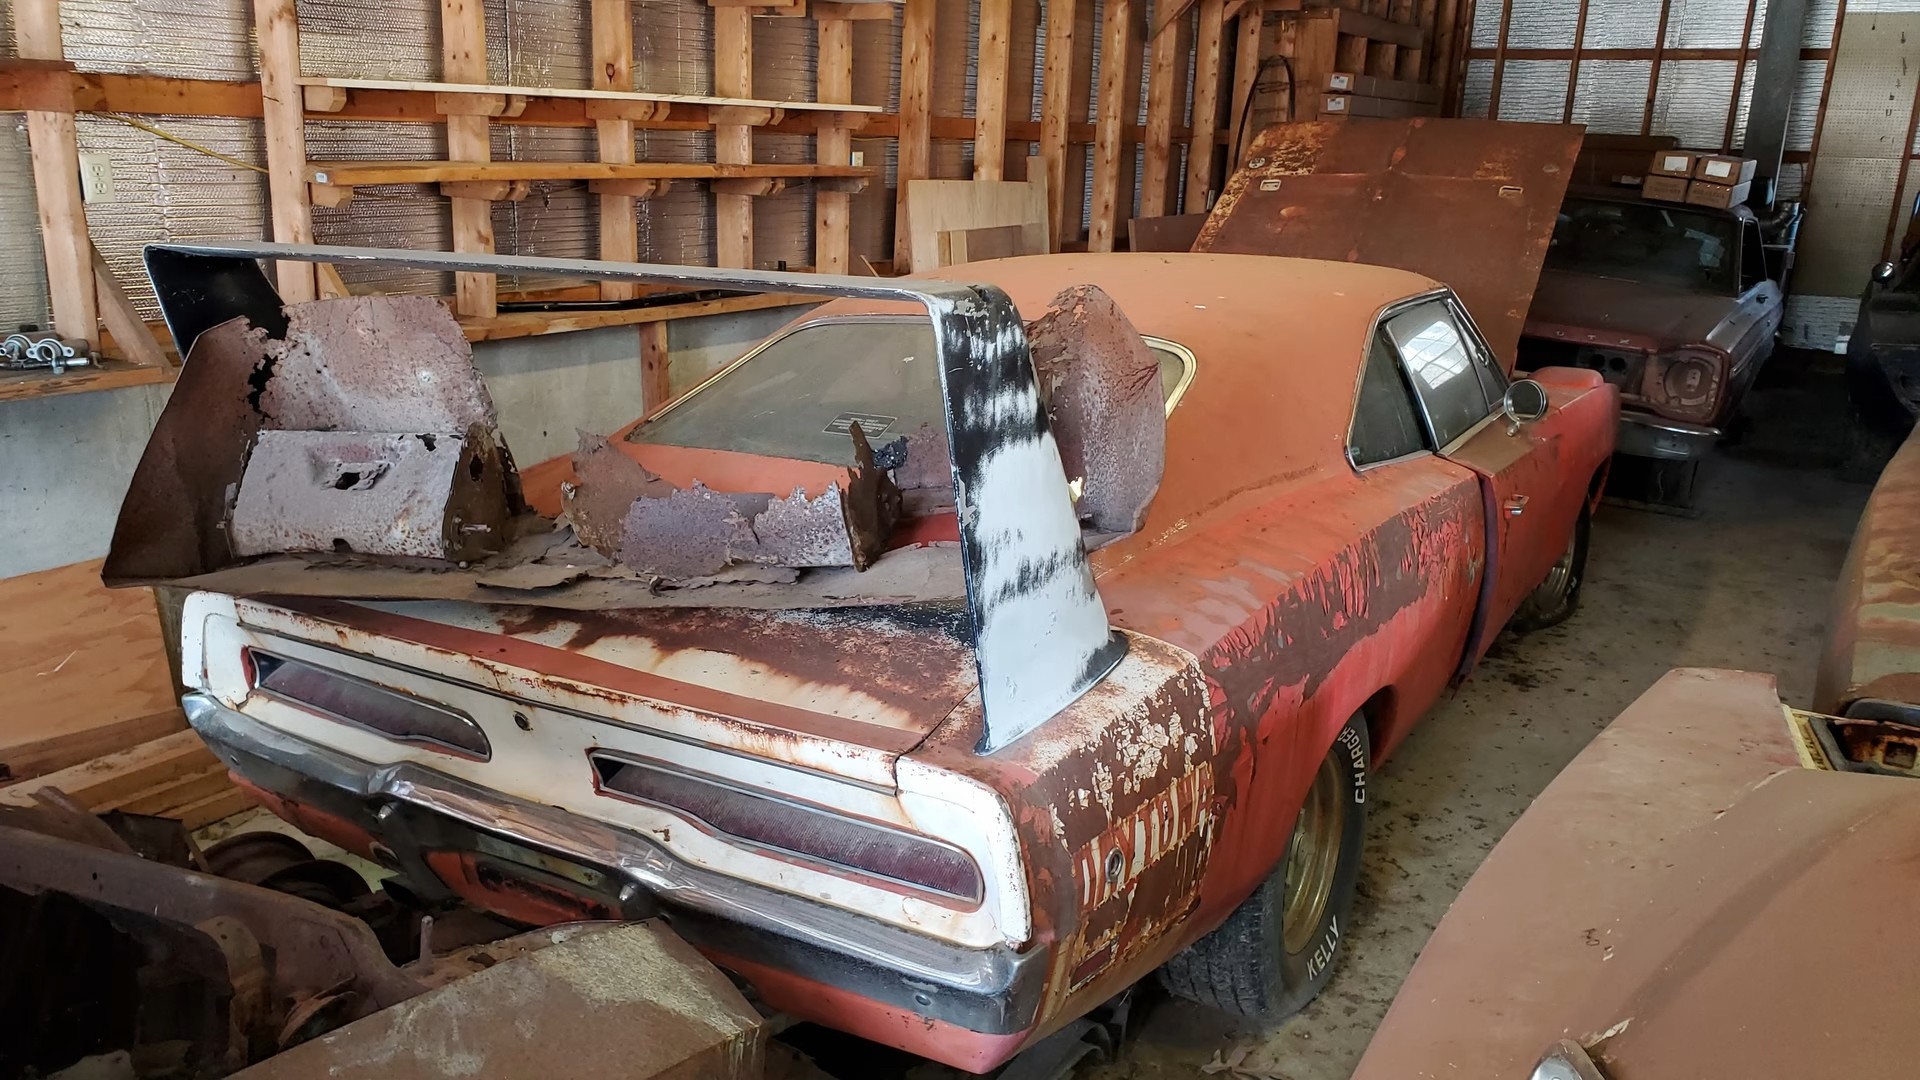 https://s1.cdn.autoevolution.com/images/news/gallery/mysterious-1969-dodge-charger-daytona-spent-decades-in-storage-gets-second-chance_6.jpg